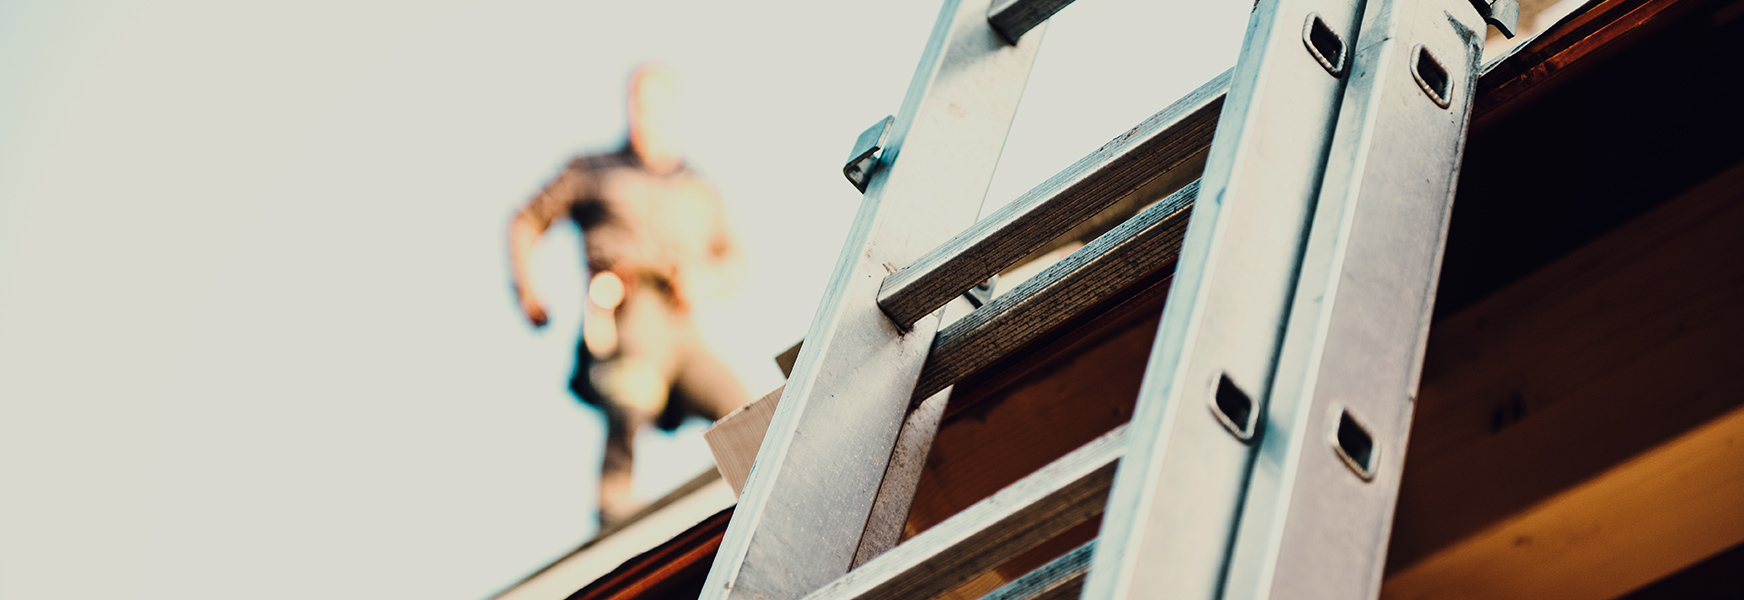 Ladder leaning on a building, out of focus worker walks on roof in background